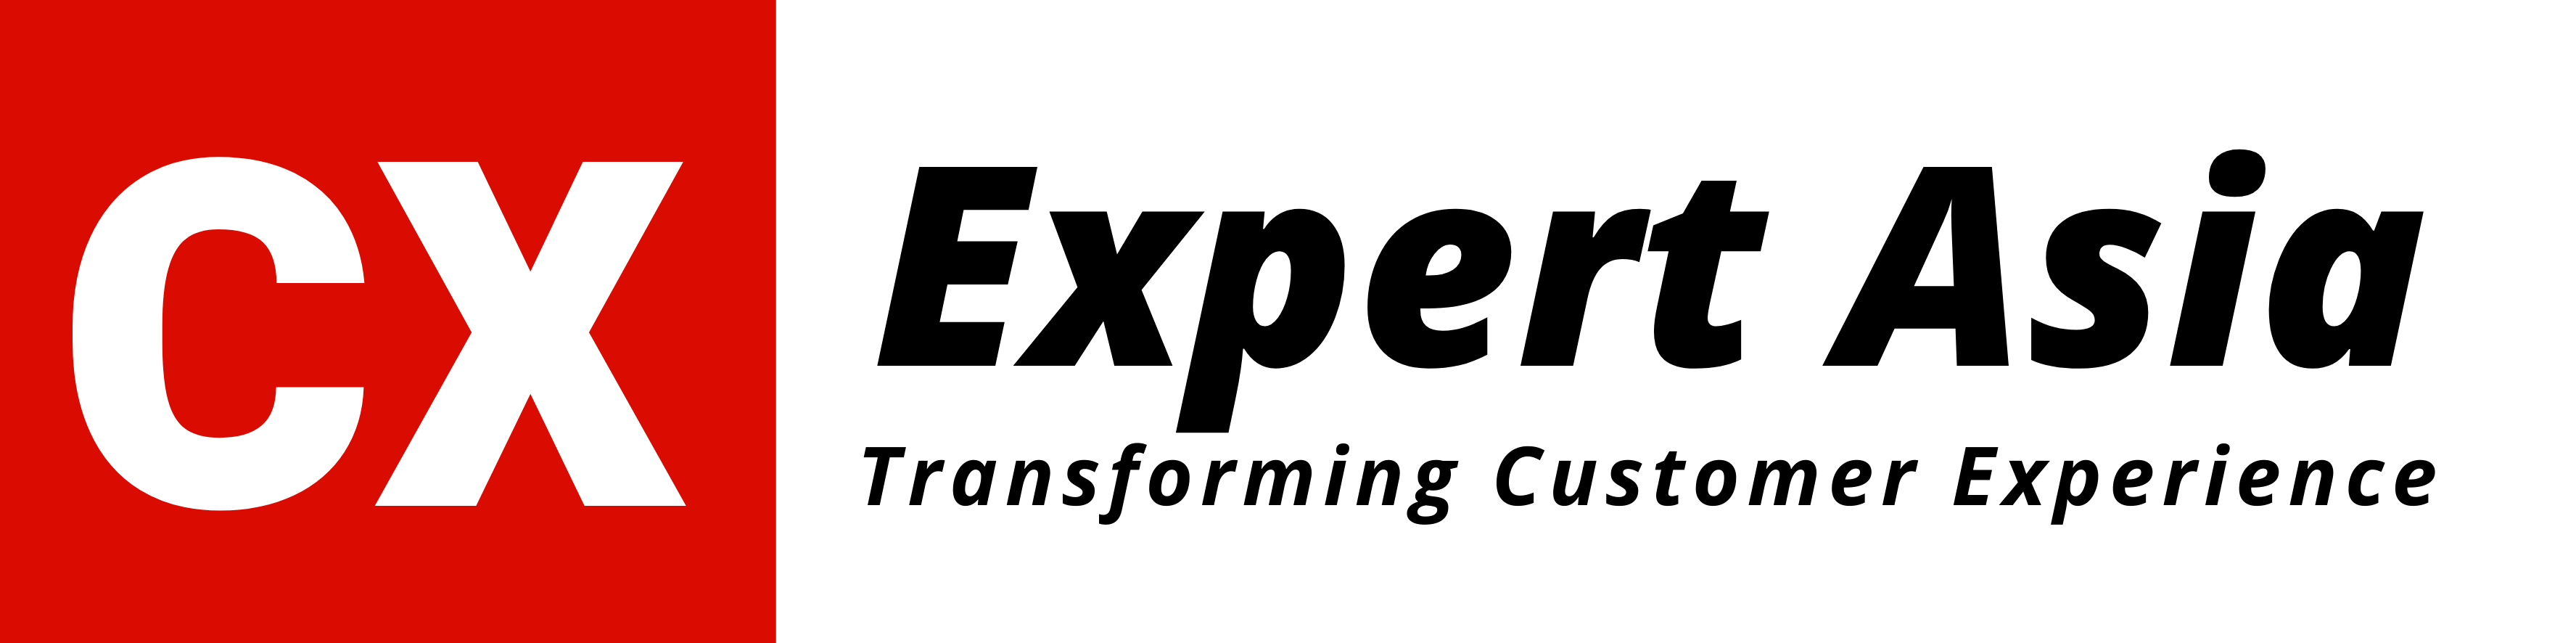 Cx Expert Asia Customer Experience training and Consulting Firm